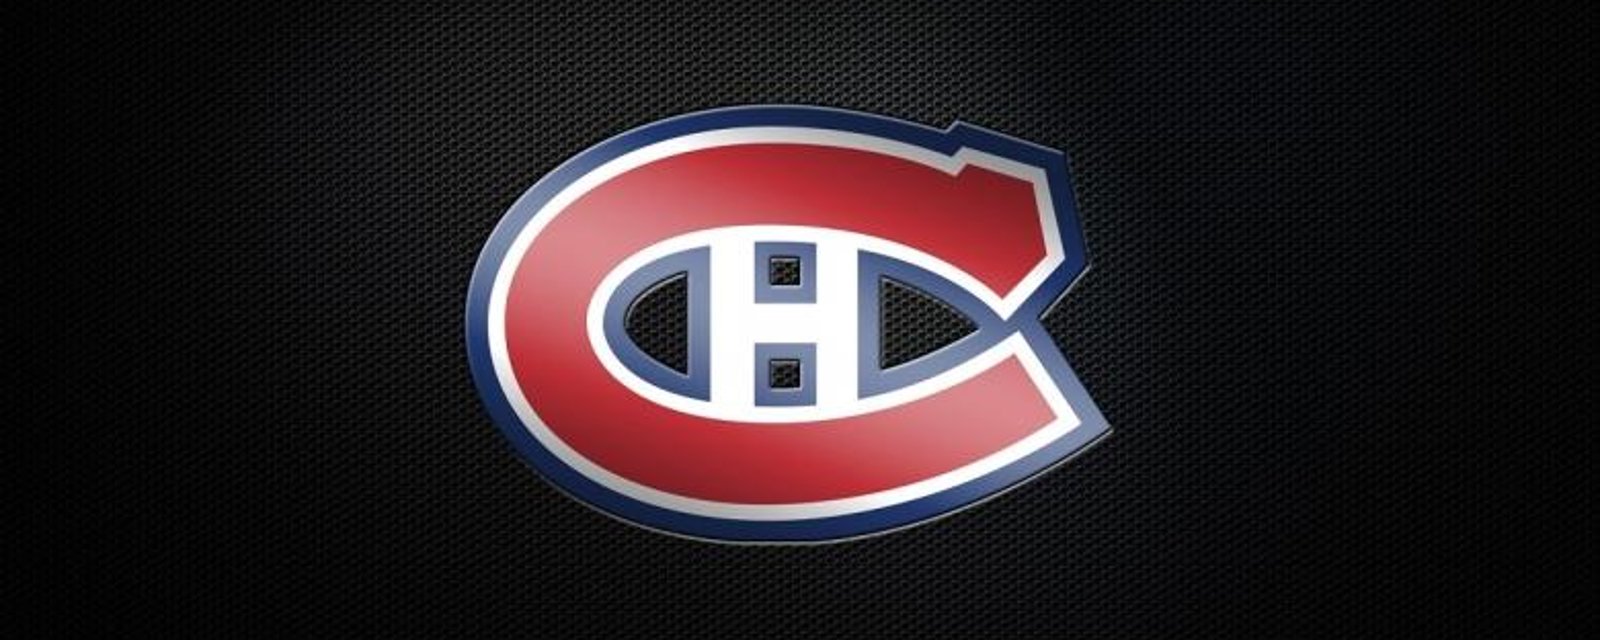 Canadiens celebrate 1M fans on twitter and it goes horribly wrong.